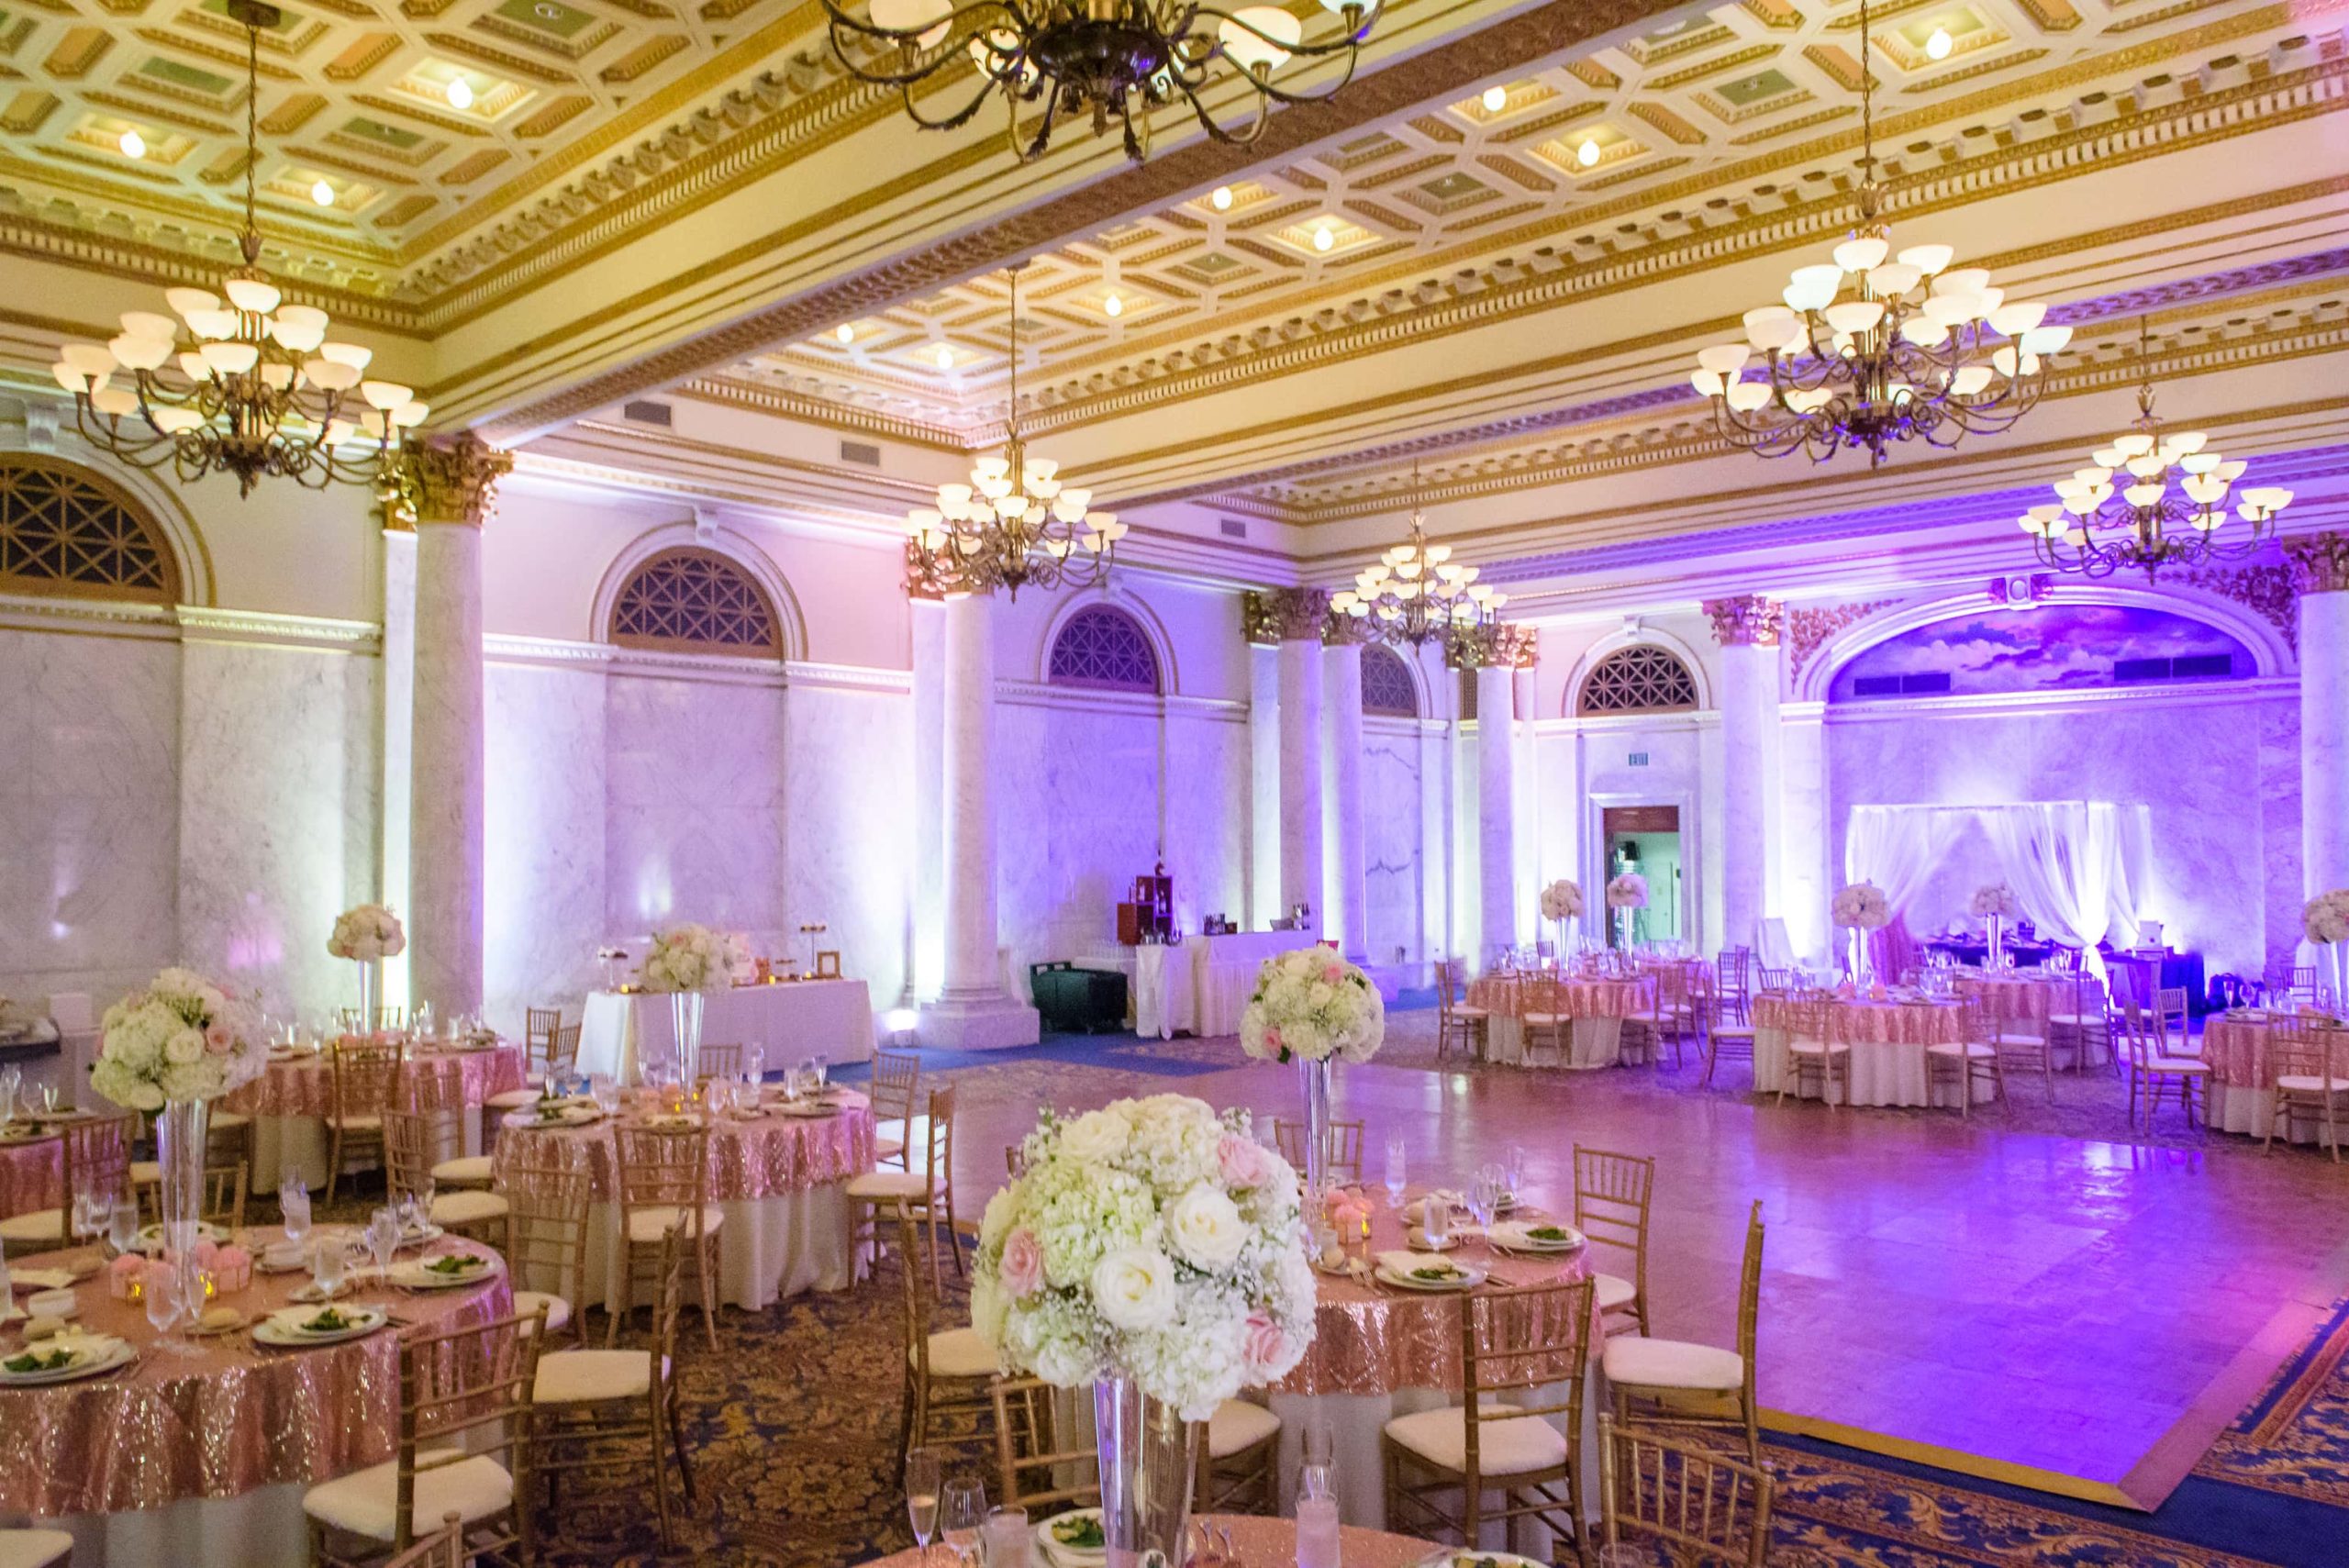 The Best Wedding Venues in Maryland